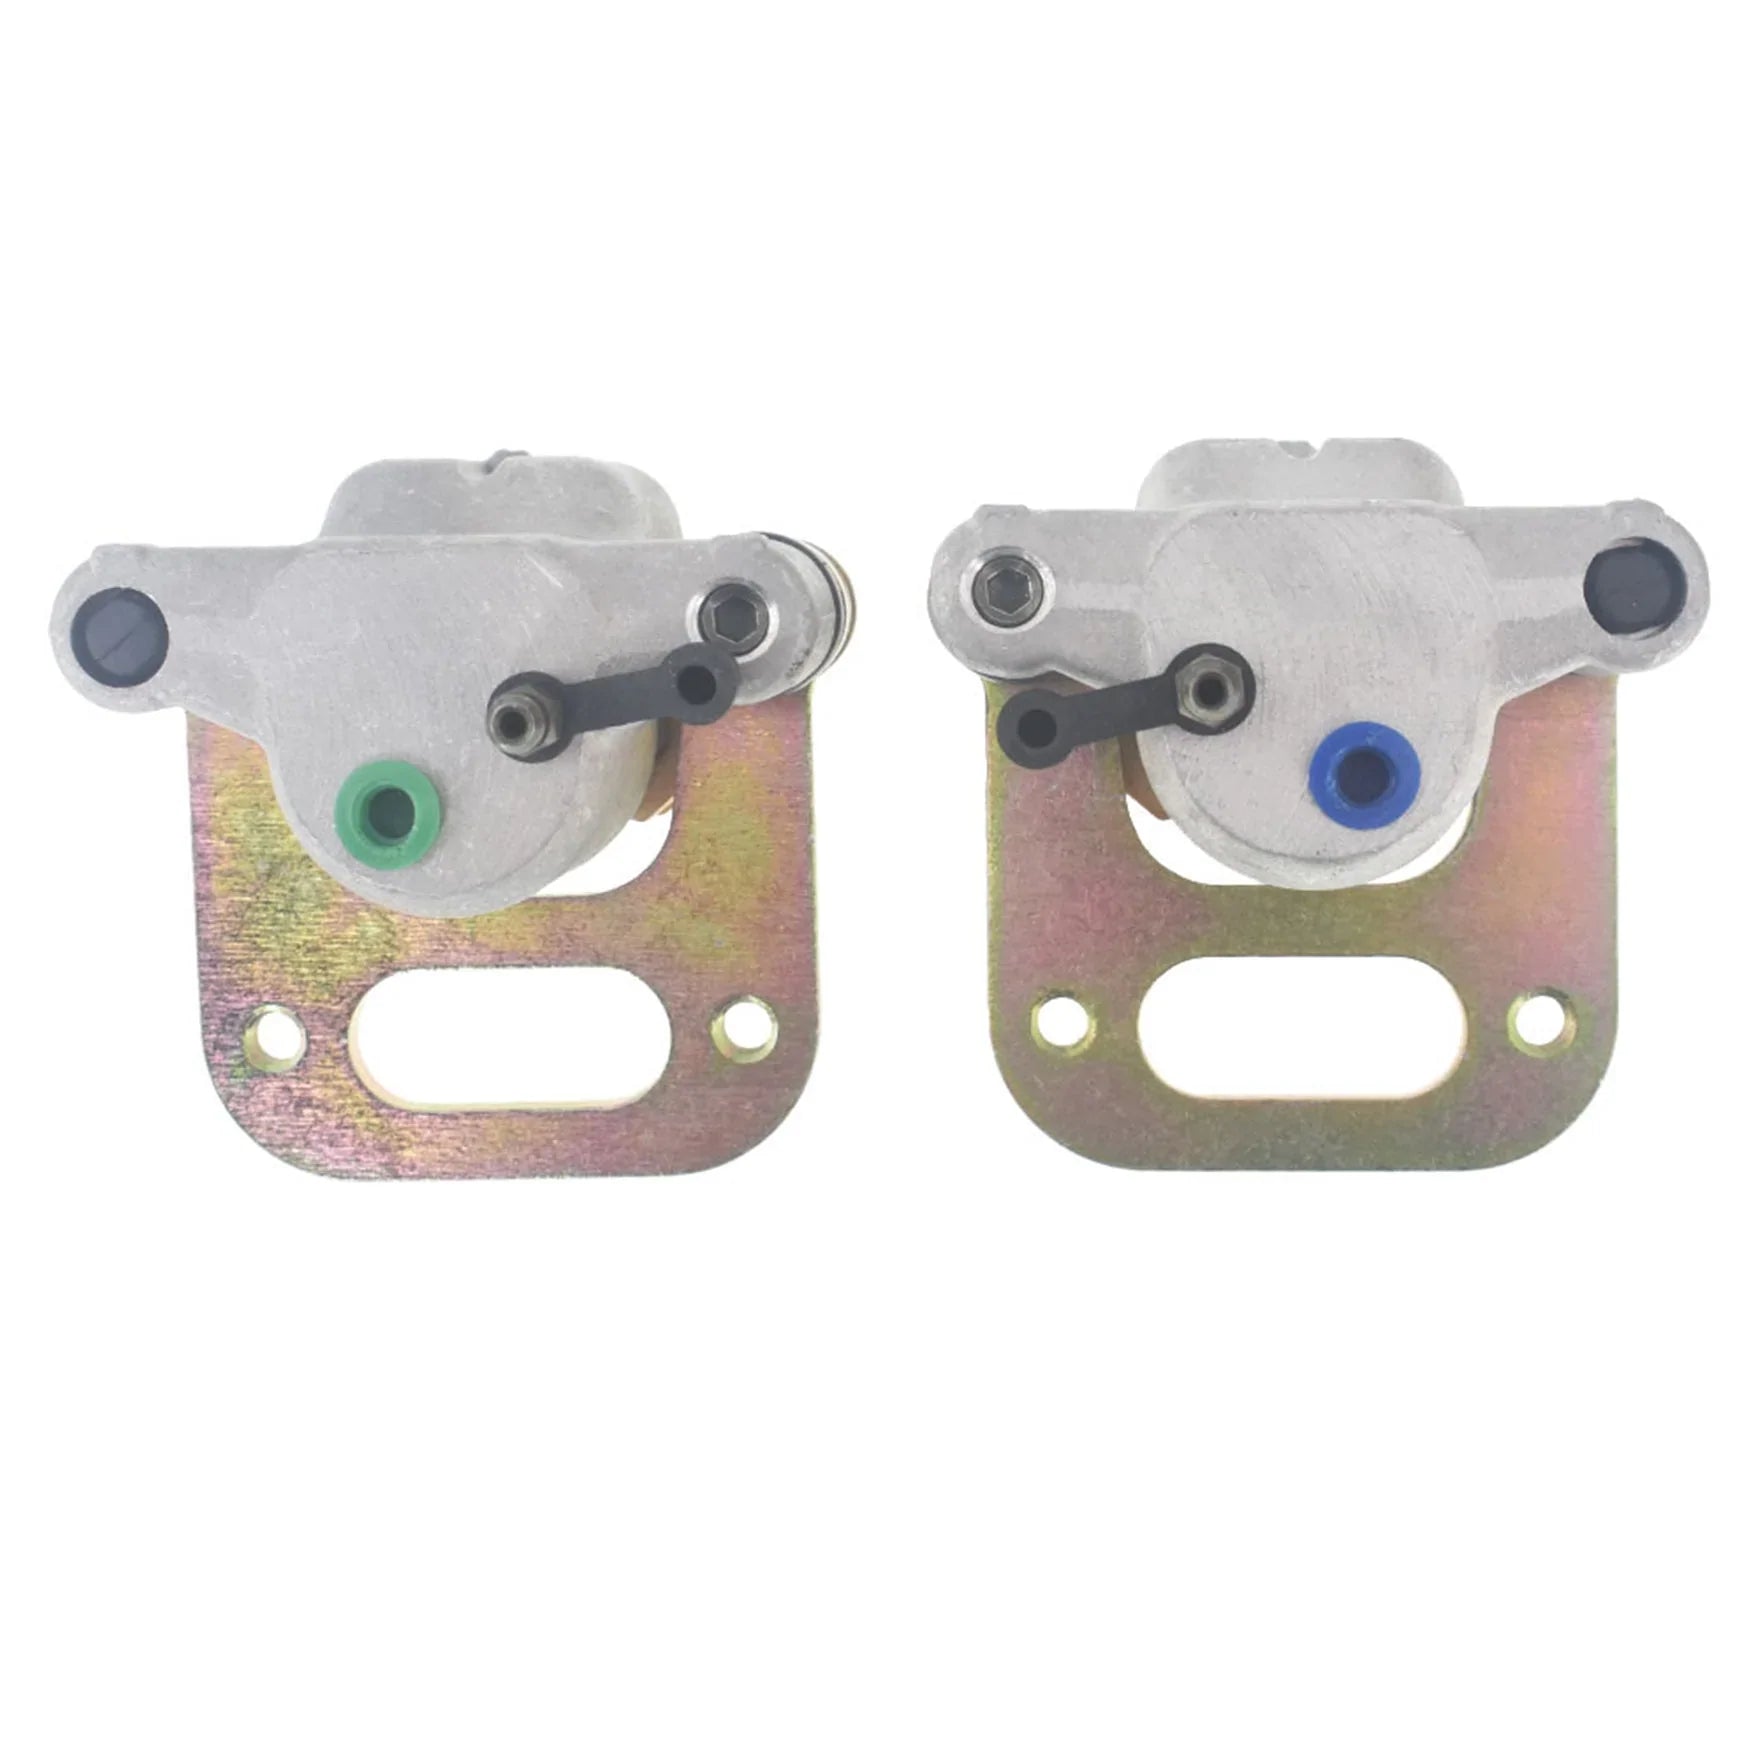 labwork Front Left Right Brake Calipers Replacement for Polaris Xplorer 400 400L 500 1995-1998 with Pads LAB WORK MOTO